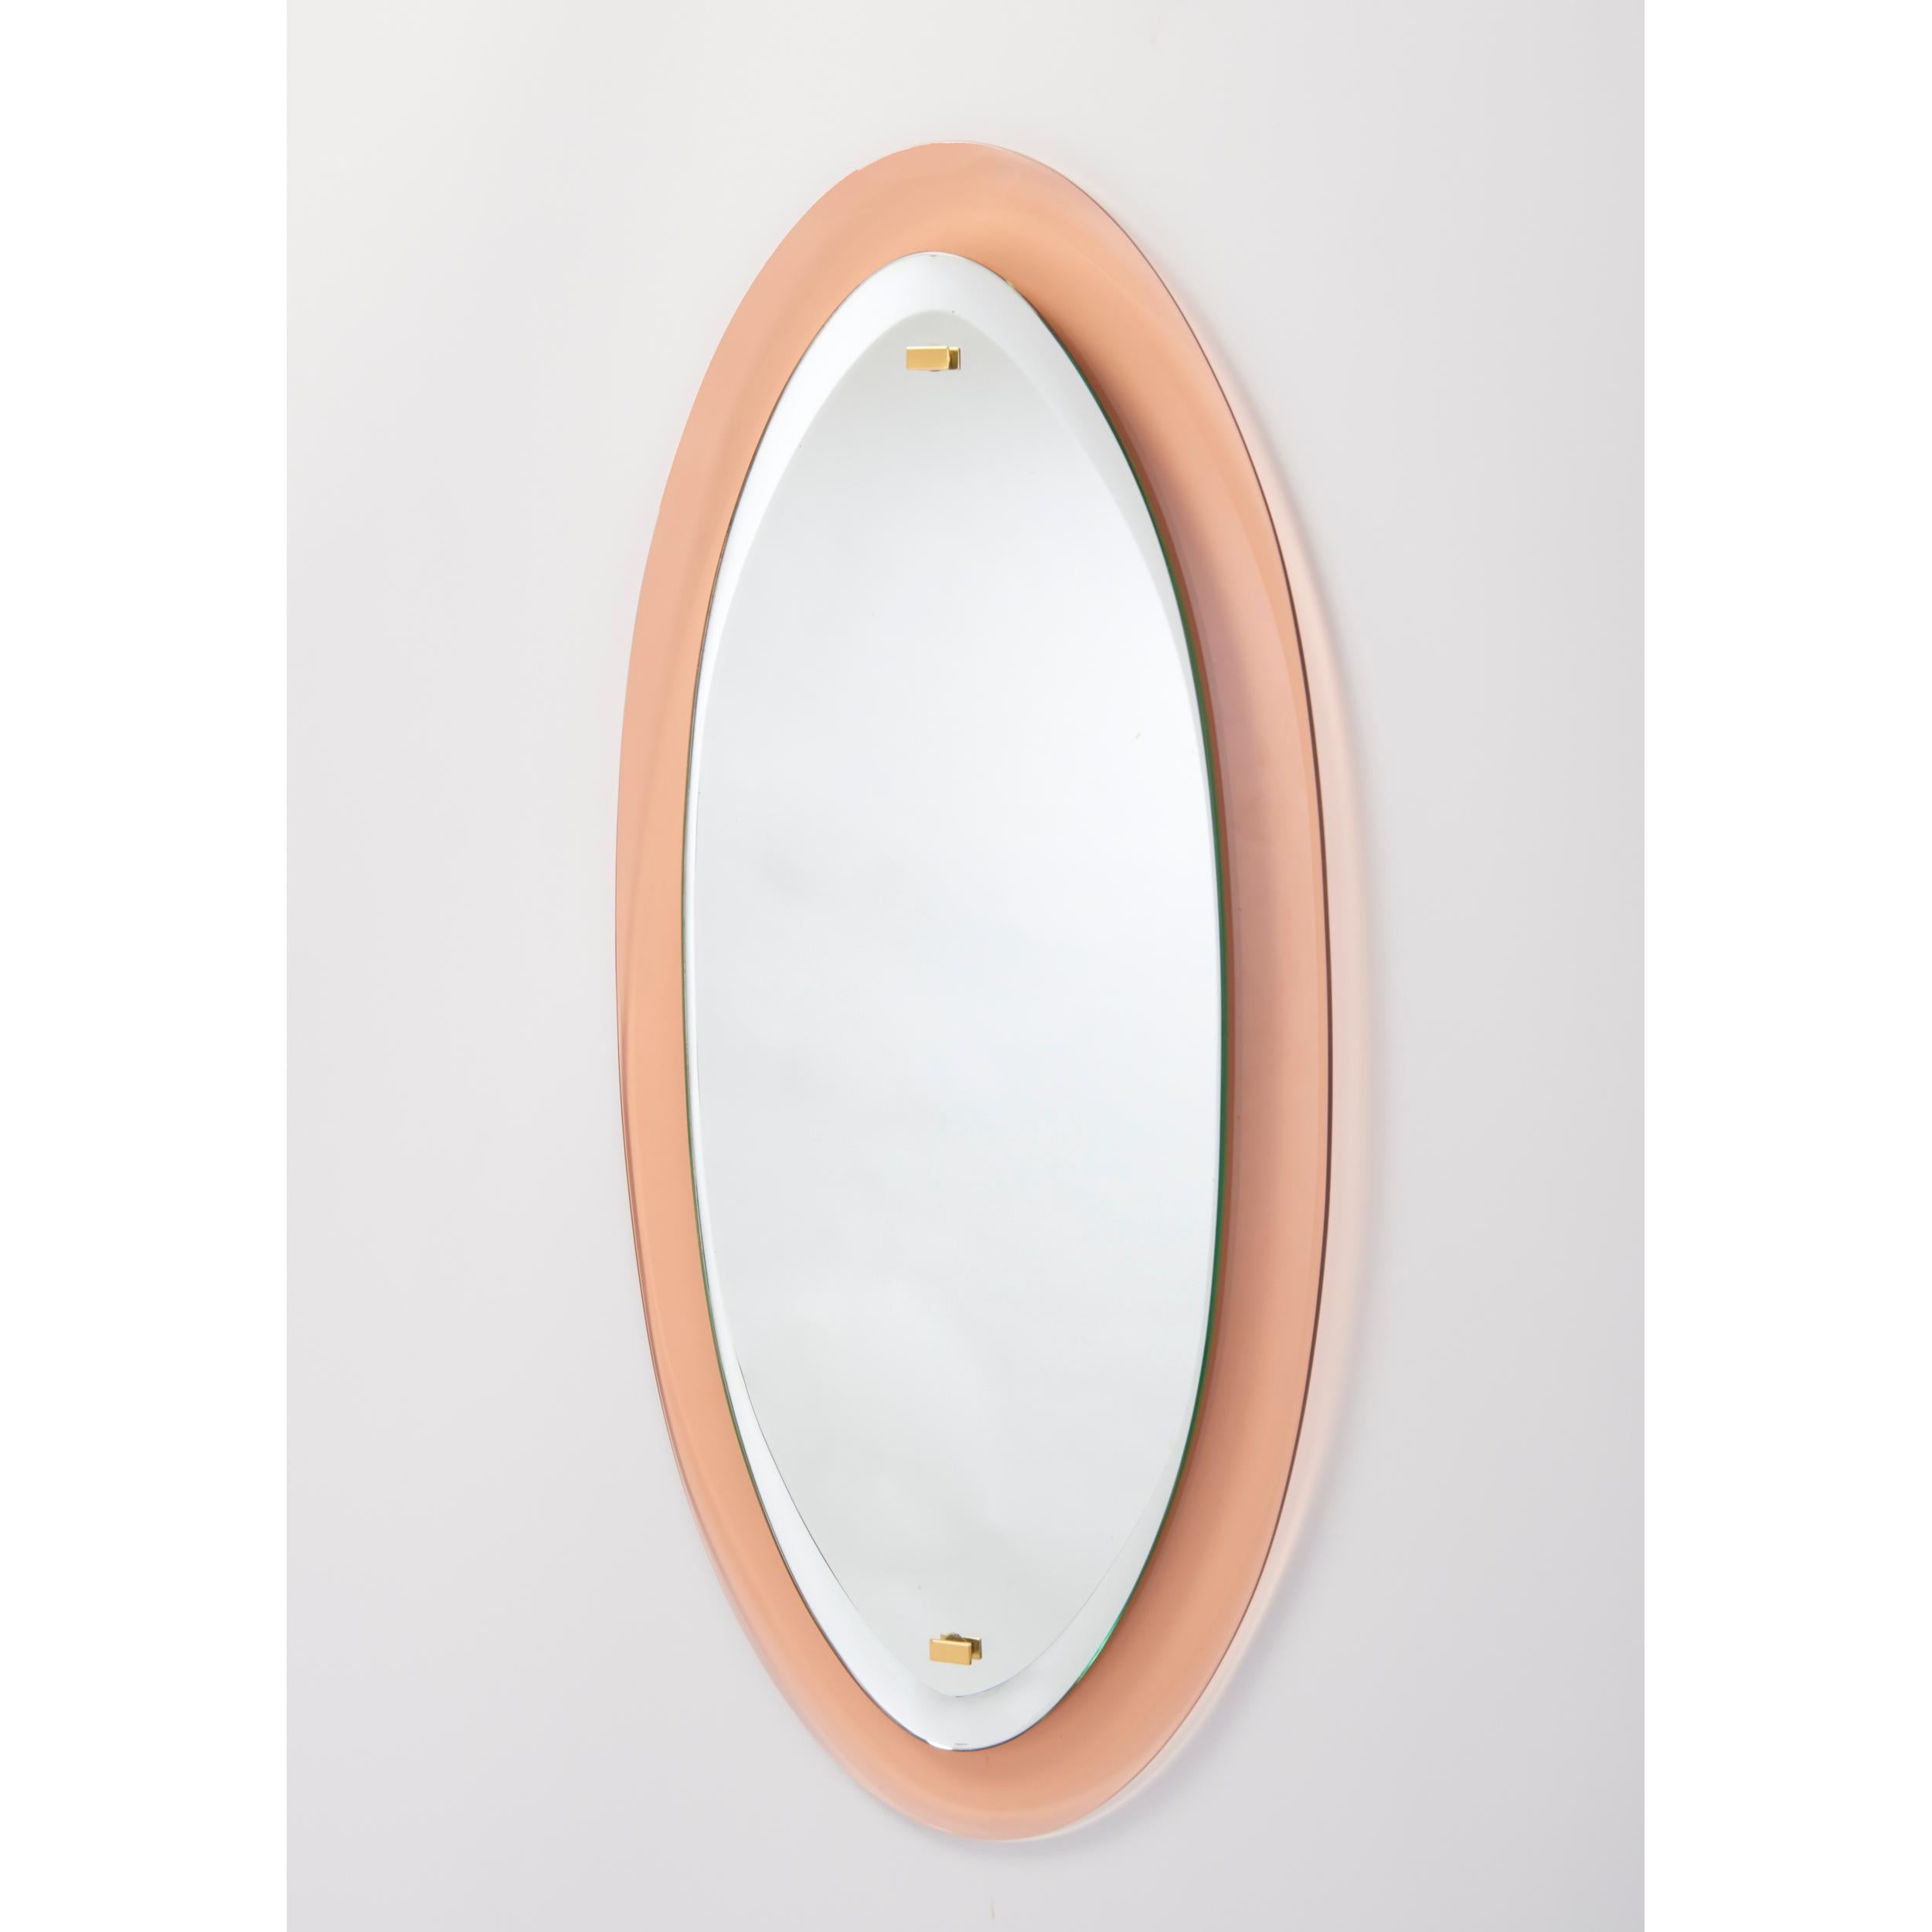 Italy, 1960's
An oval mirror on beveled colored glass frame, with polished brass mounts
Dimensions : 35 H x 17 W.